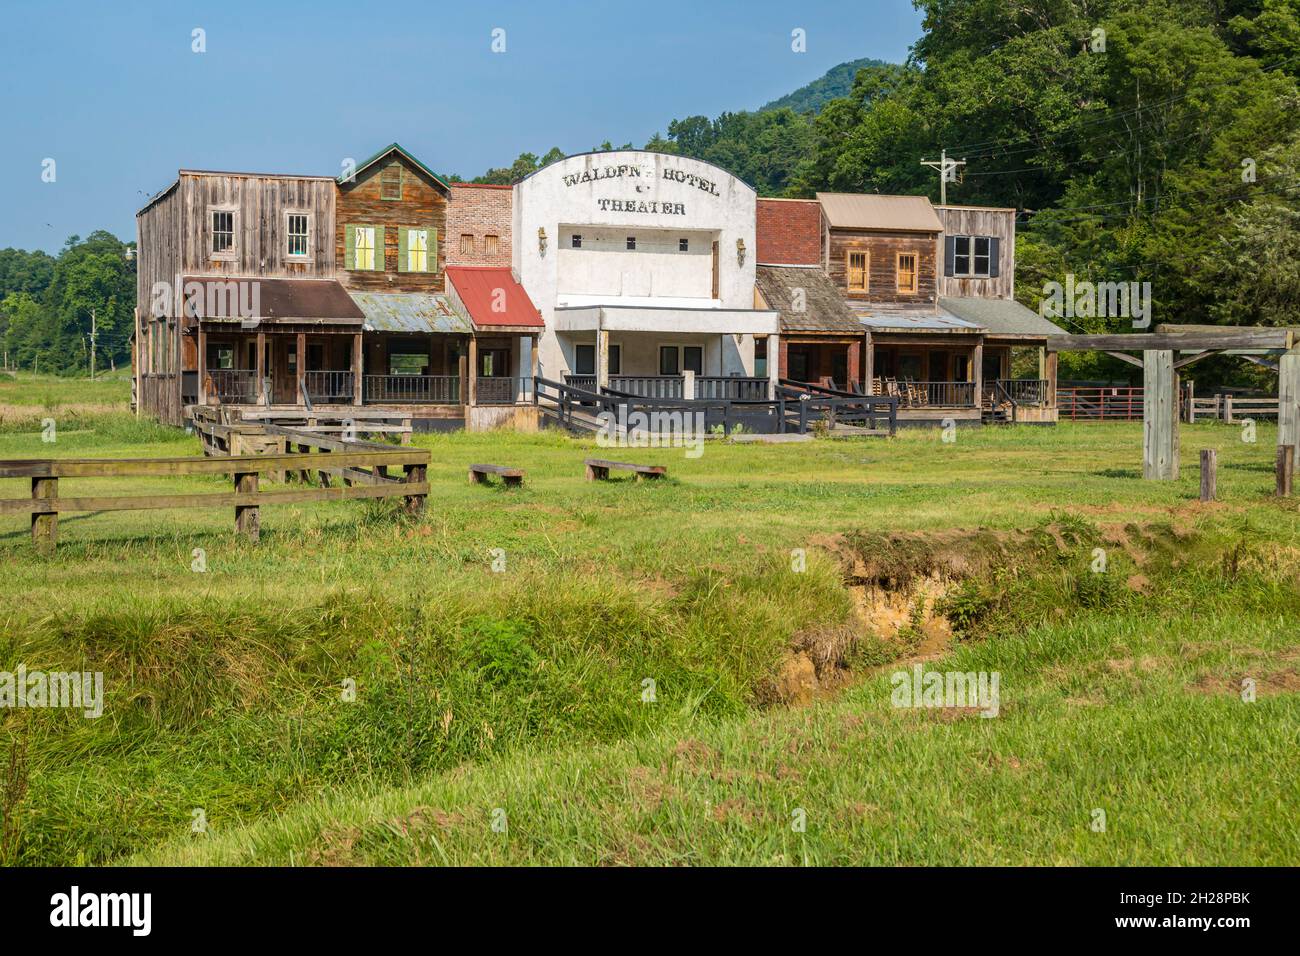 Old Walden's Hotel and Theater props at Walden Creek Stables in Pigeon Forge, Tennessee Stock Photo